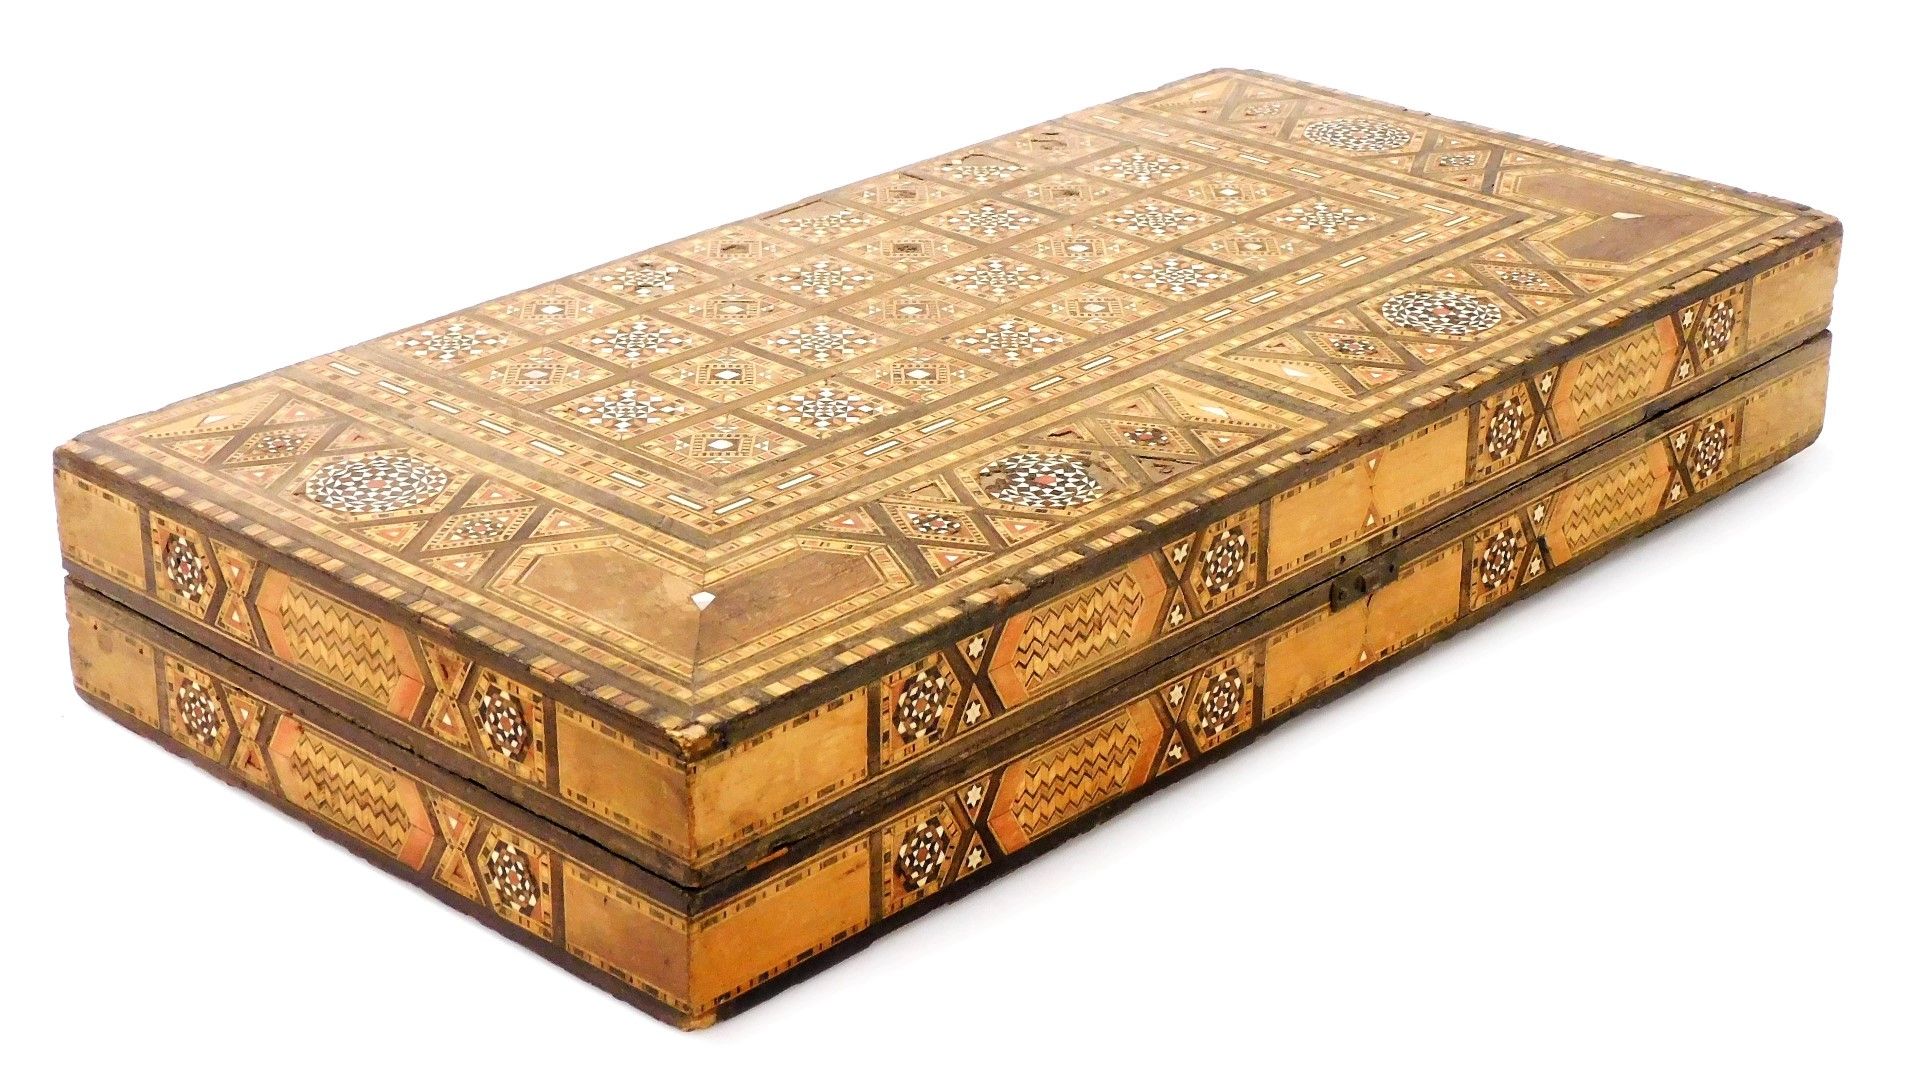 A Moorish inlaid backgammon box, profusely inlaid with finely detailed parquetry panelling and with